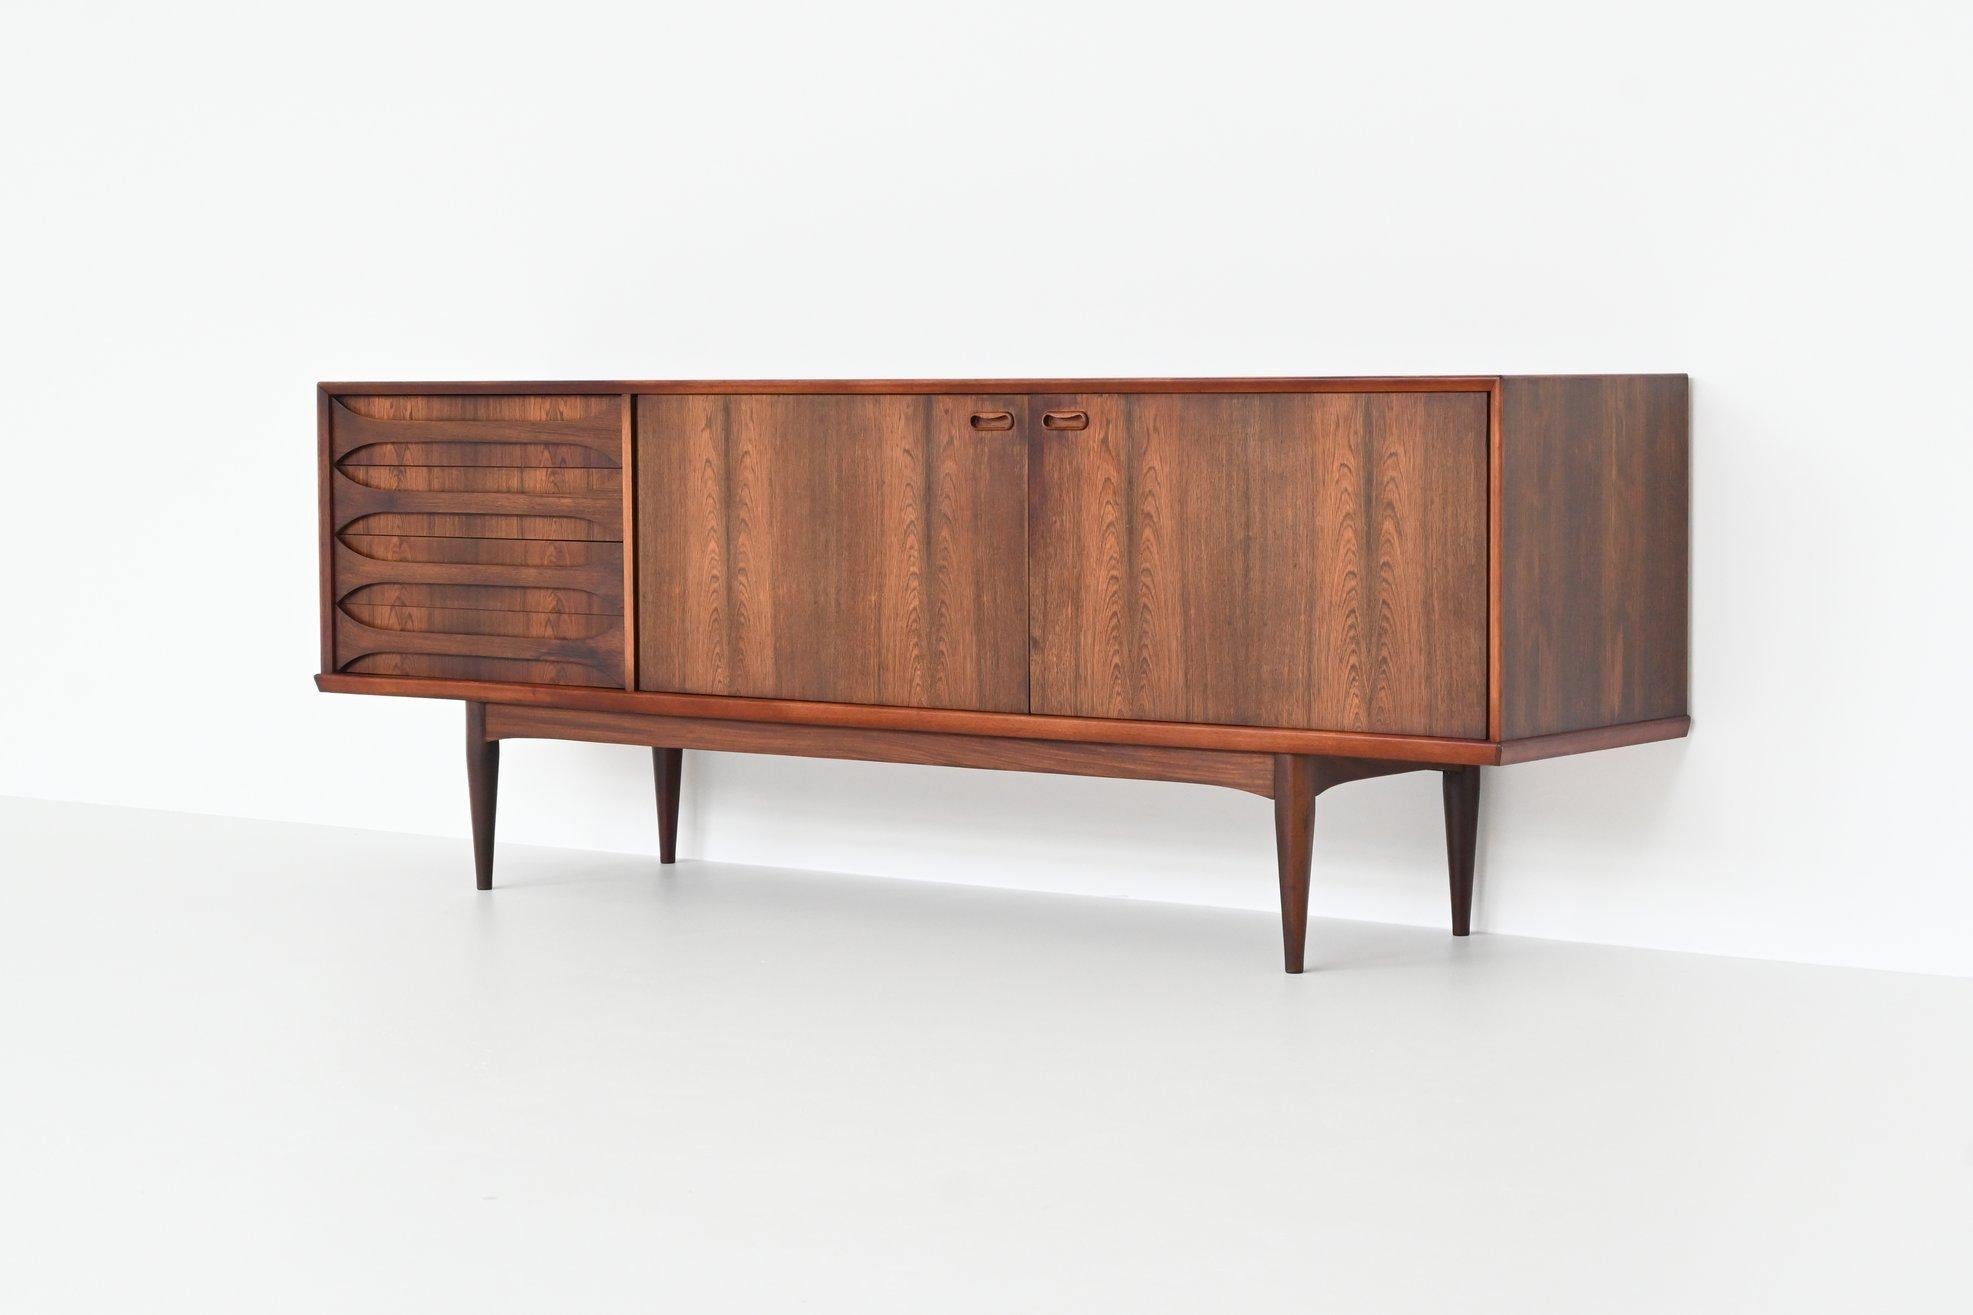 Stunning high quality sideboard model “Astrid” designed by Oswald Vermaercke and manufactured by V-Form, Belgium 1959. This sideboard is made of beautiful grained veneered rosewood with solid legs. It has two wide doors with a shelf behind and four